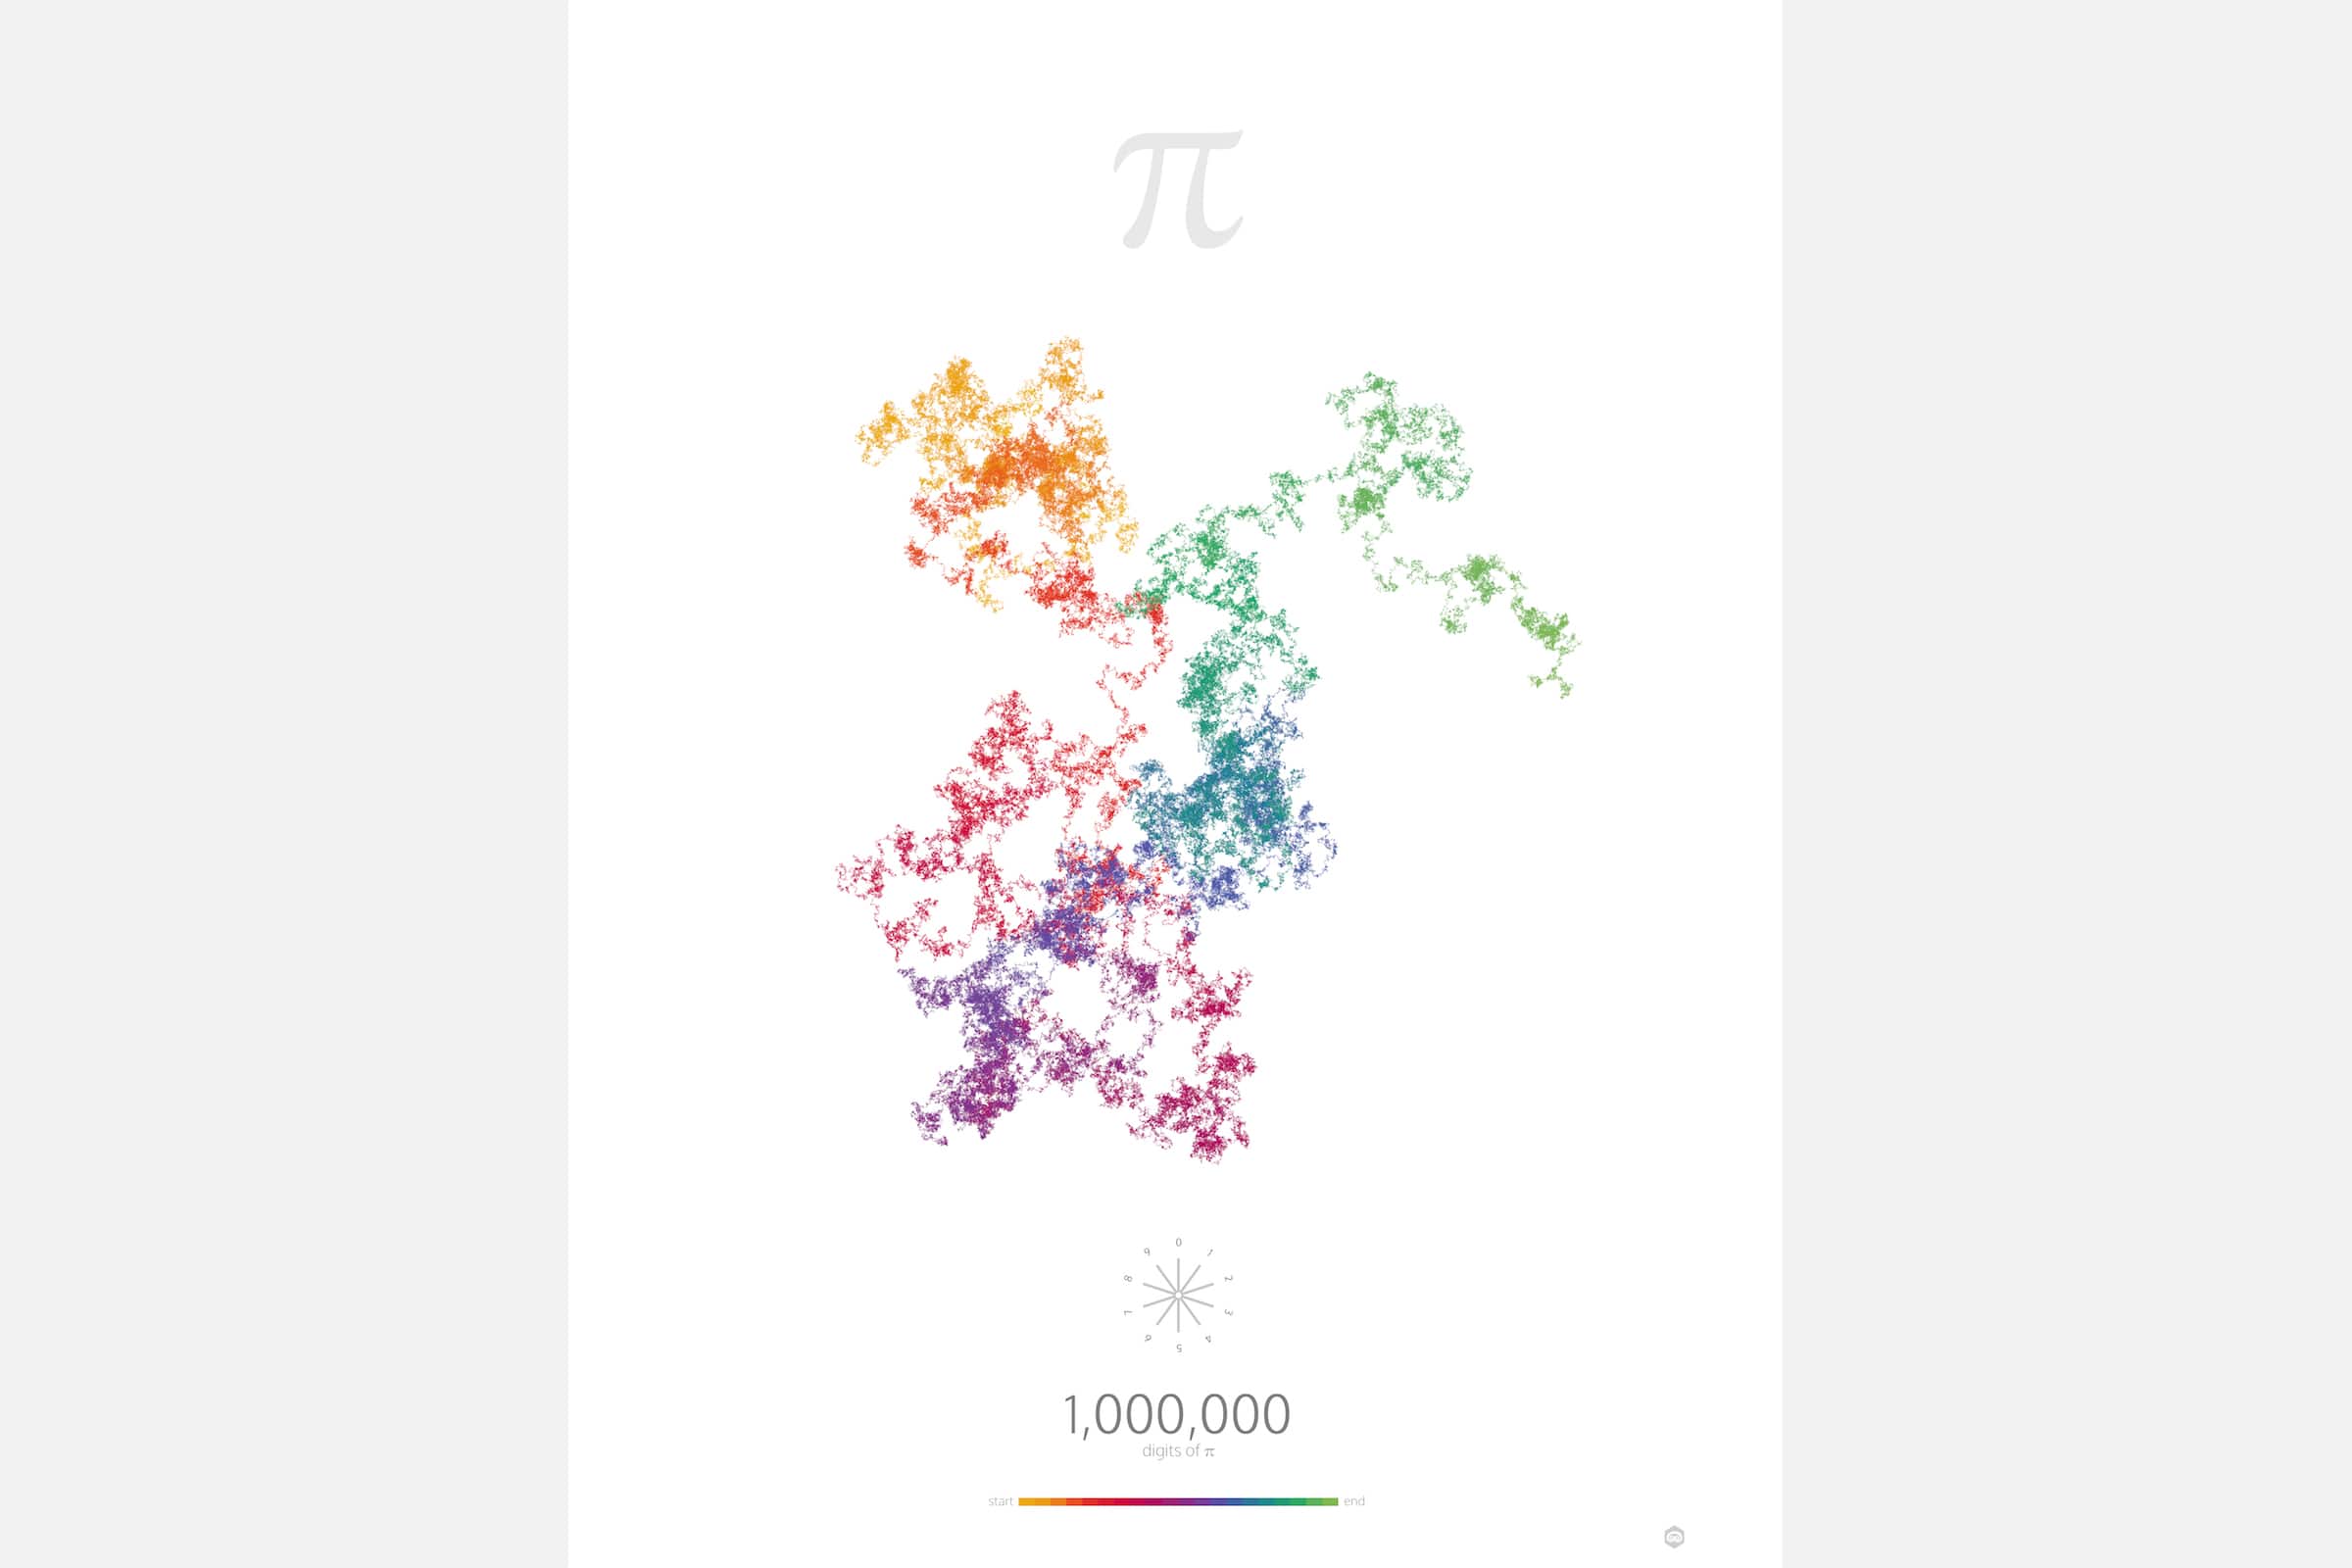 The poster of the first million digits of pi